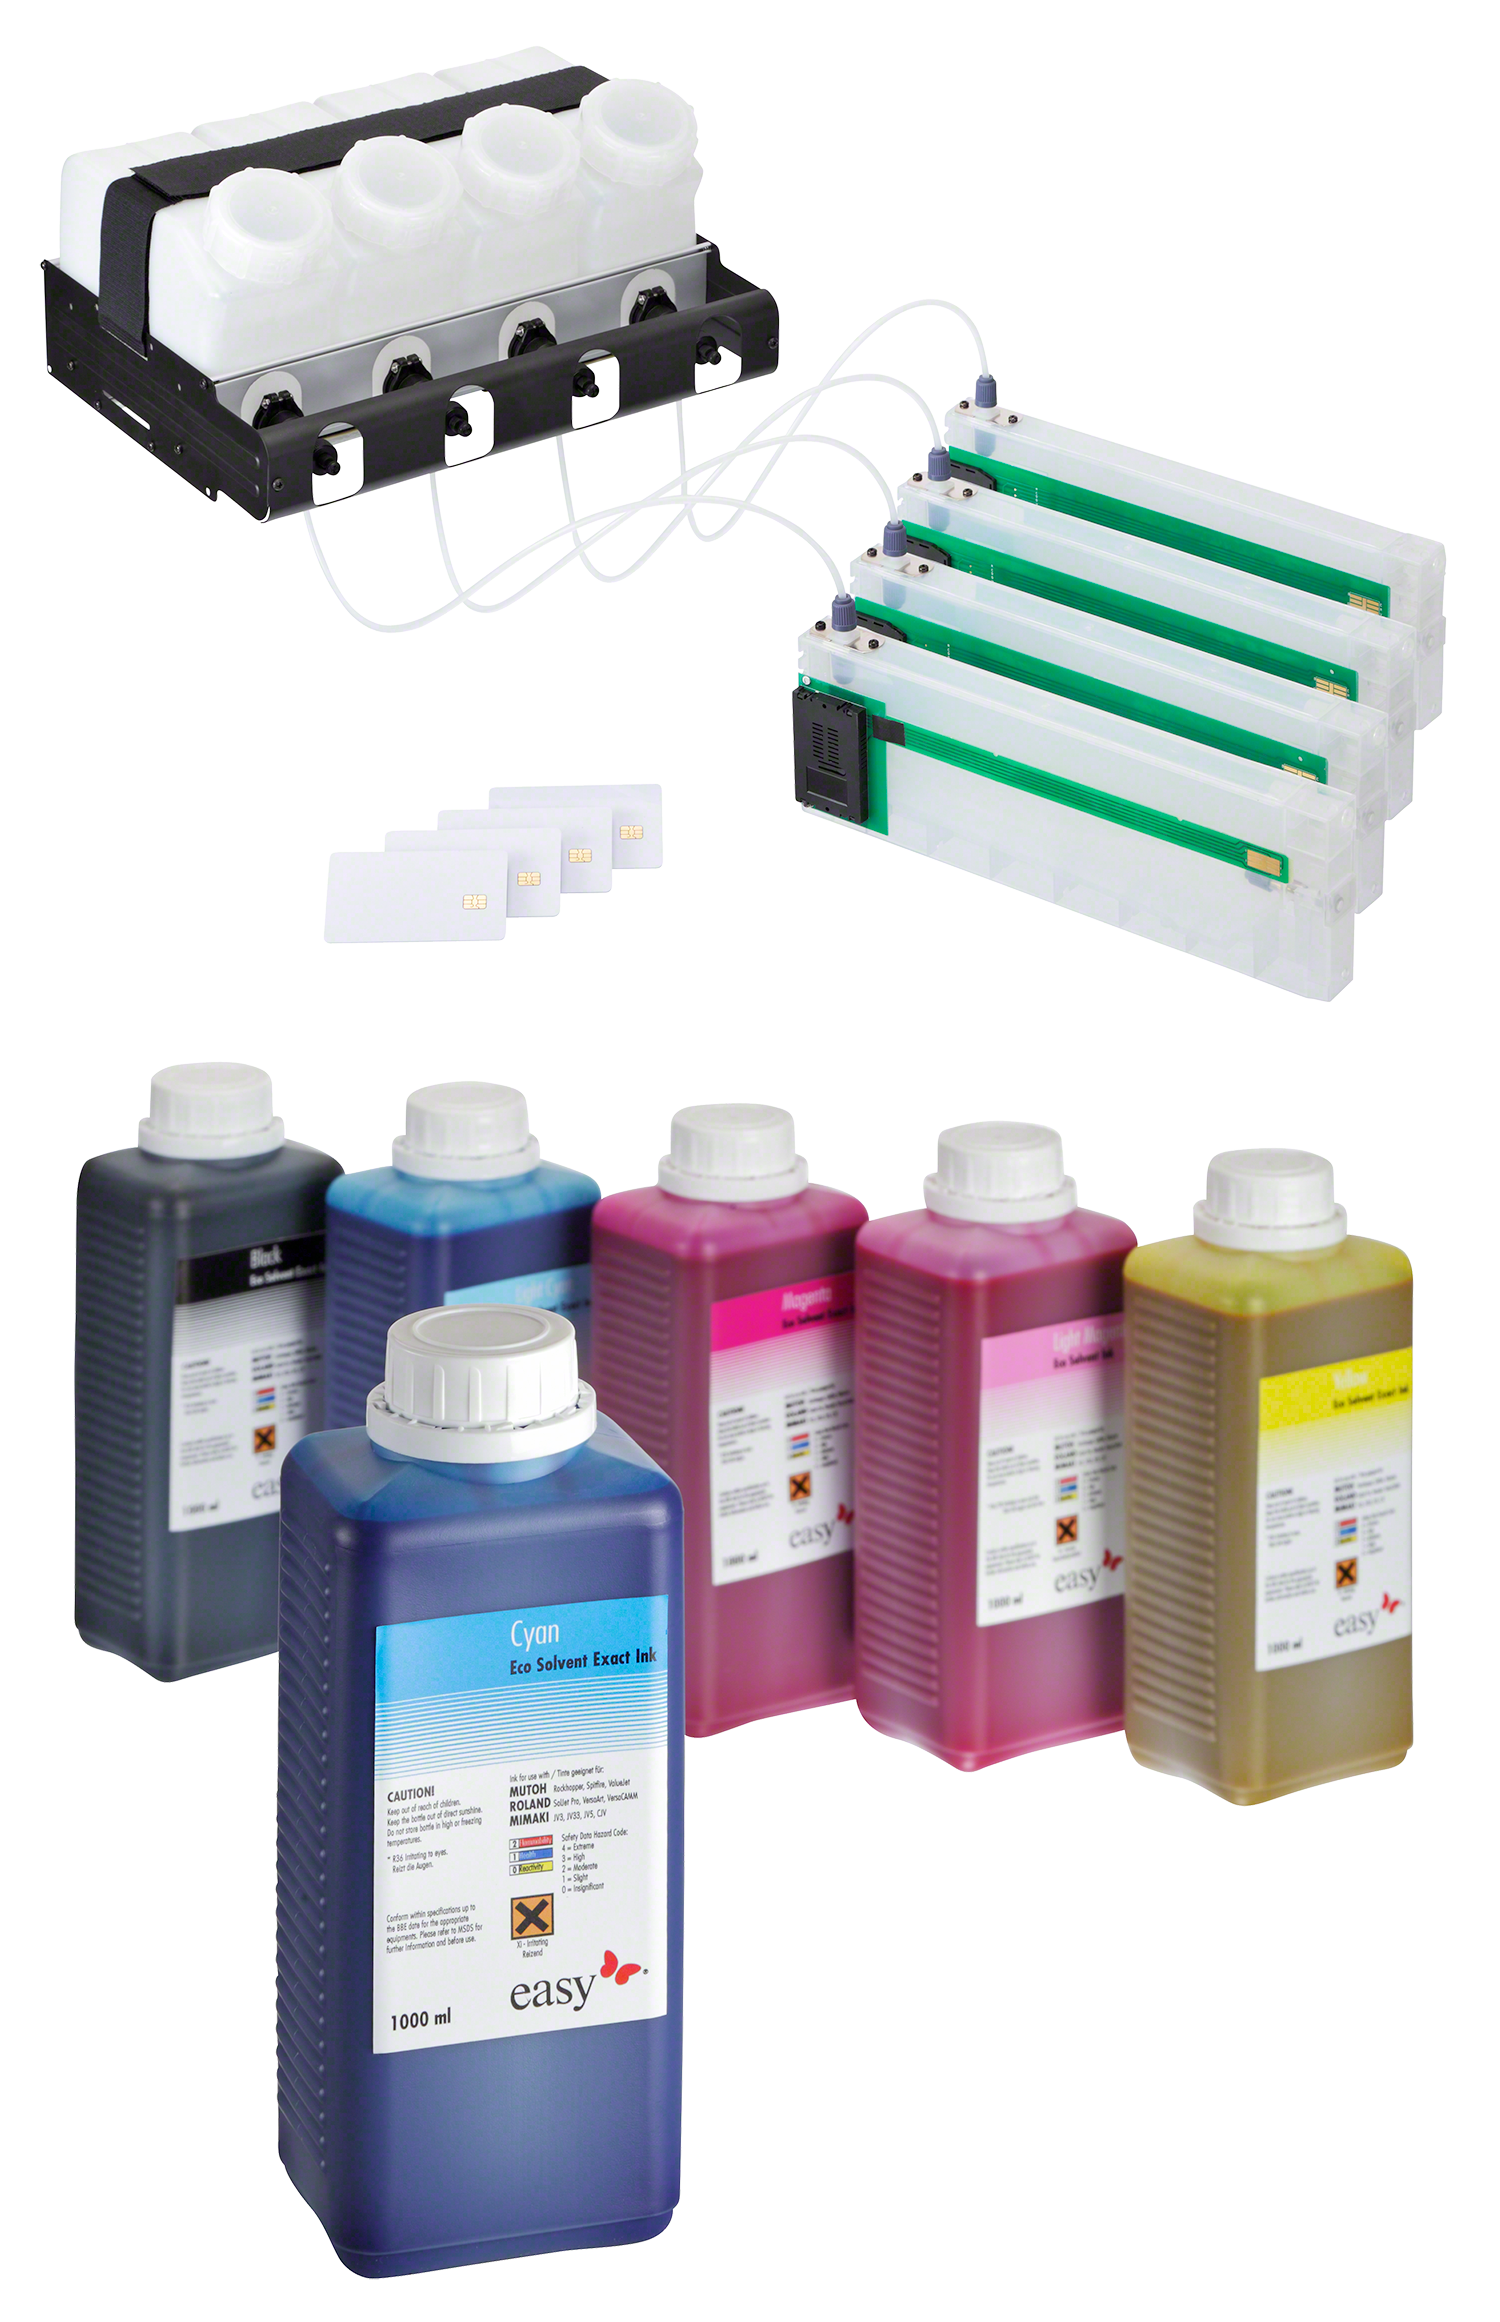 Blockoffer easyTank Continuous Ink Supply System for 1 x 4 colors for Agfa, Mutoh, Océ, Xerox